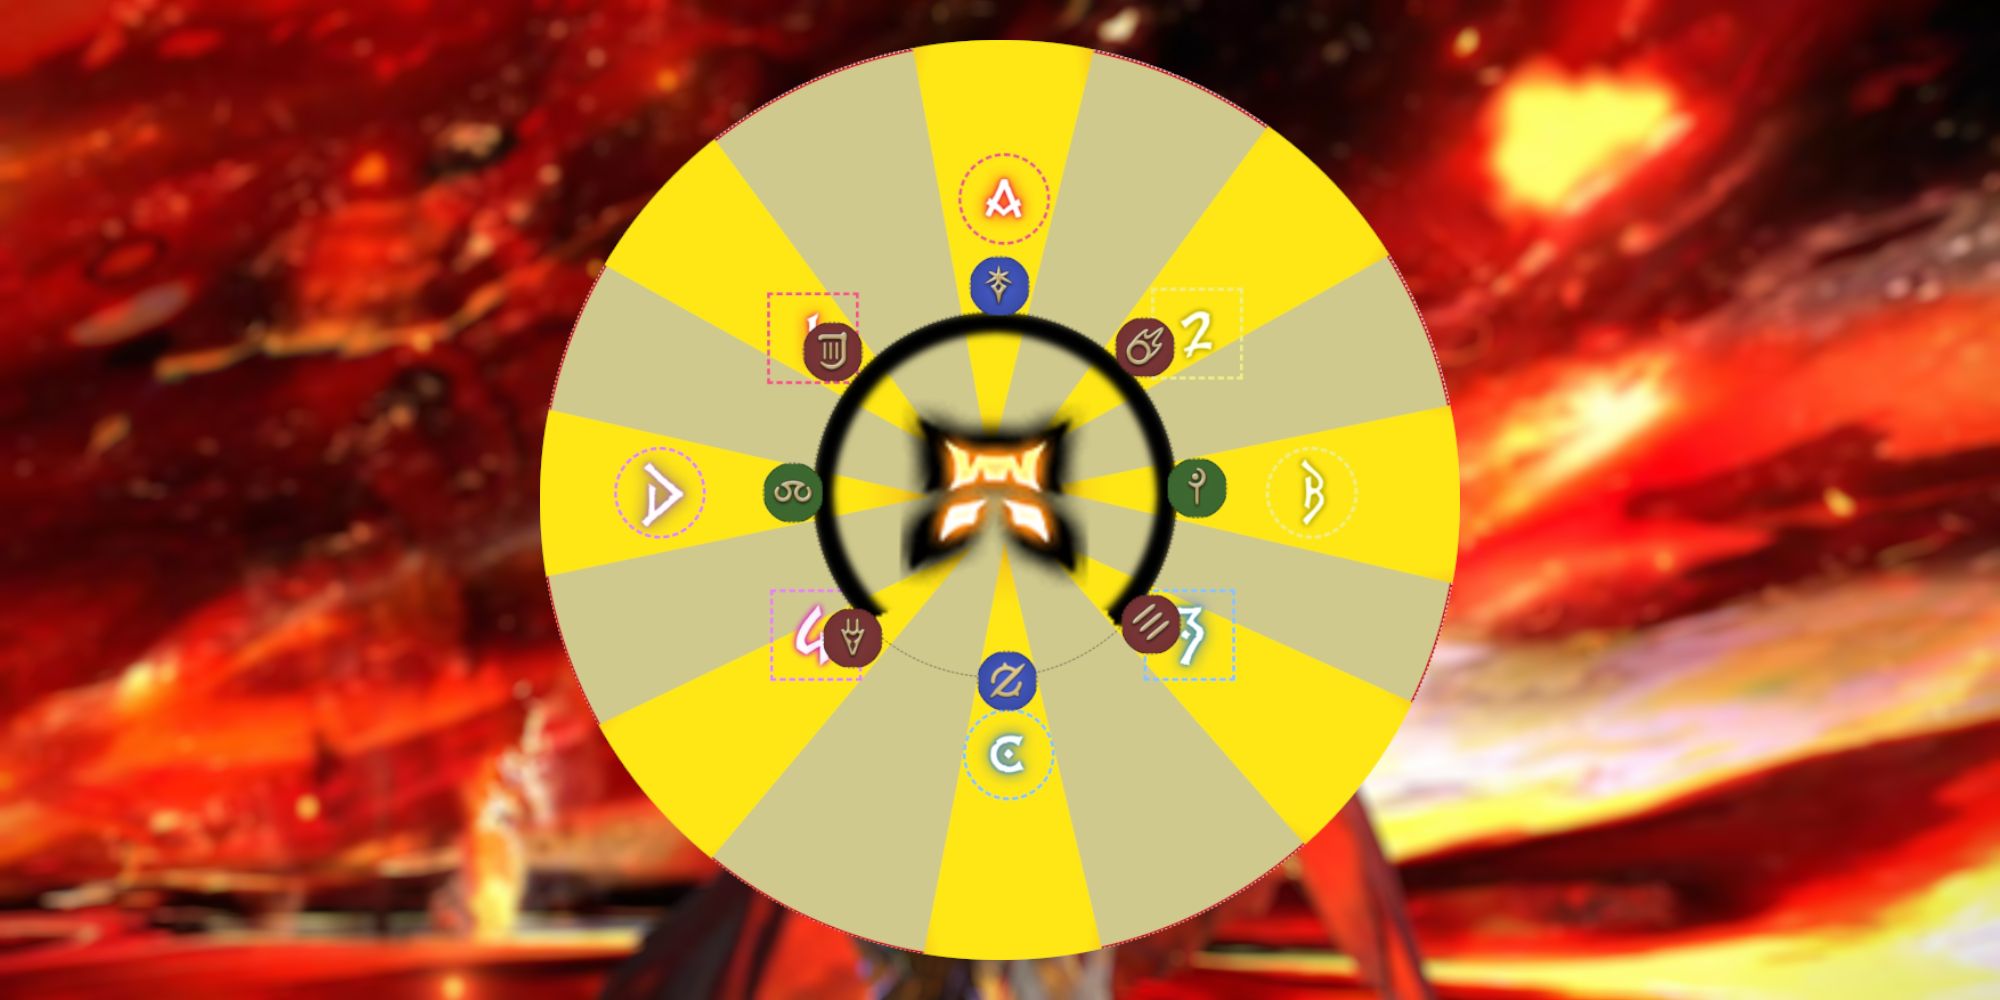 The Radial Flagration Mechanic in the Mount Ordeals Extreme Trial, having Rubicante send out Cone-shaped AoEs at the Clock Positions of each player in Final Fantasy 14